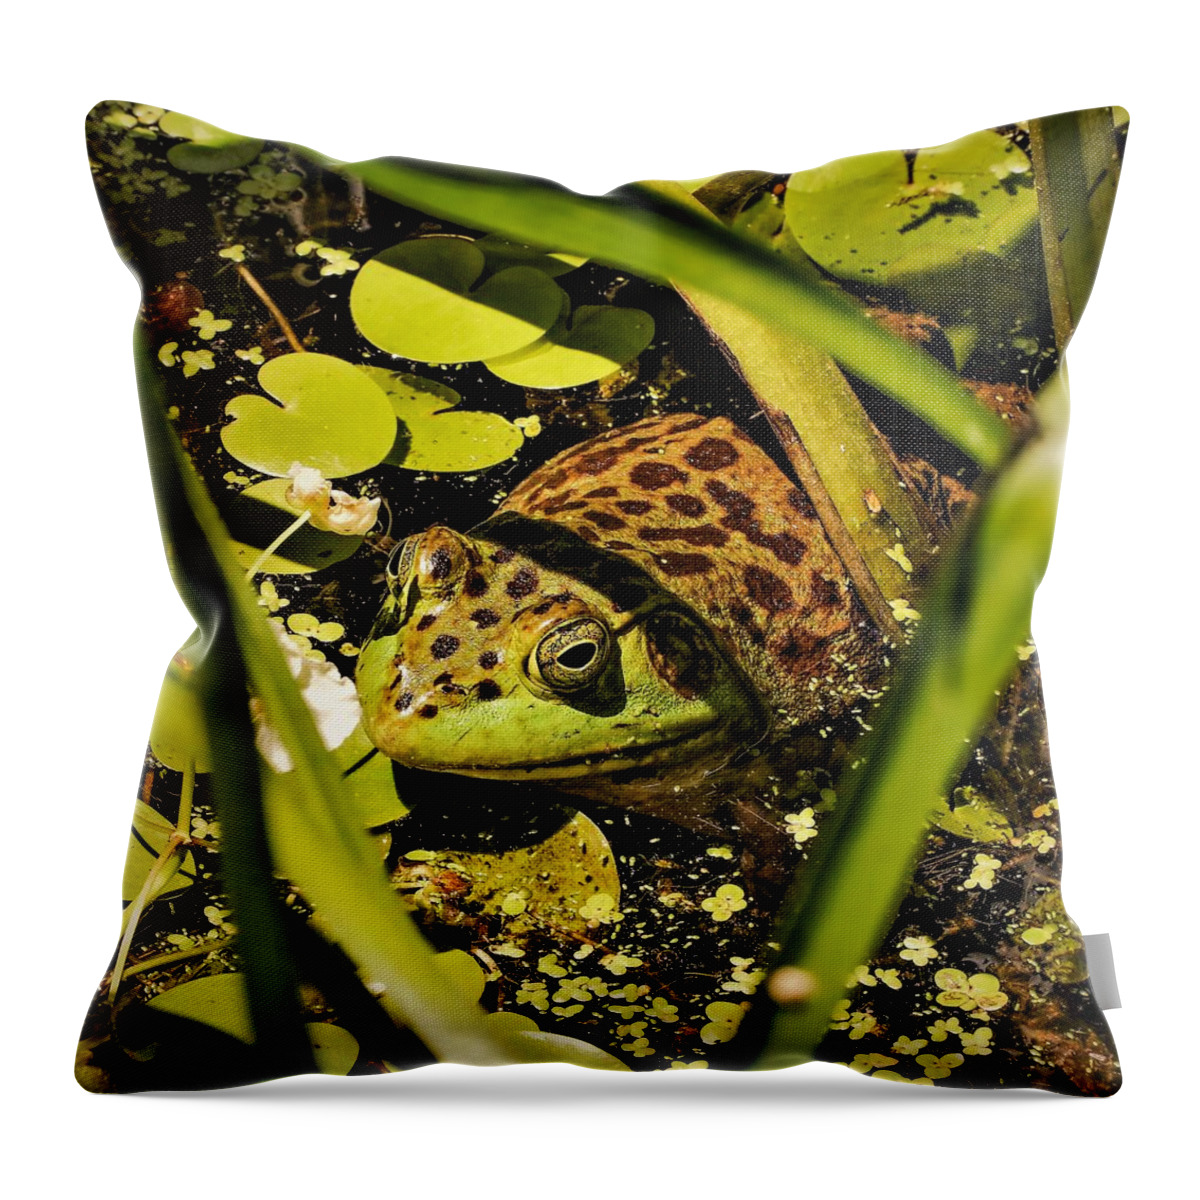 Frog Water Pond Green Leaves Eye Reptile Throw Pillow featuring the photograph Frog by John Linnemeyer